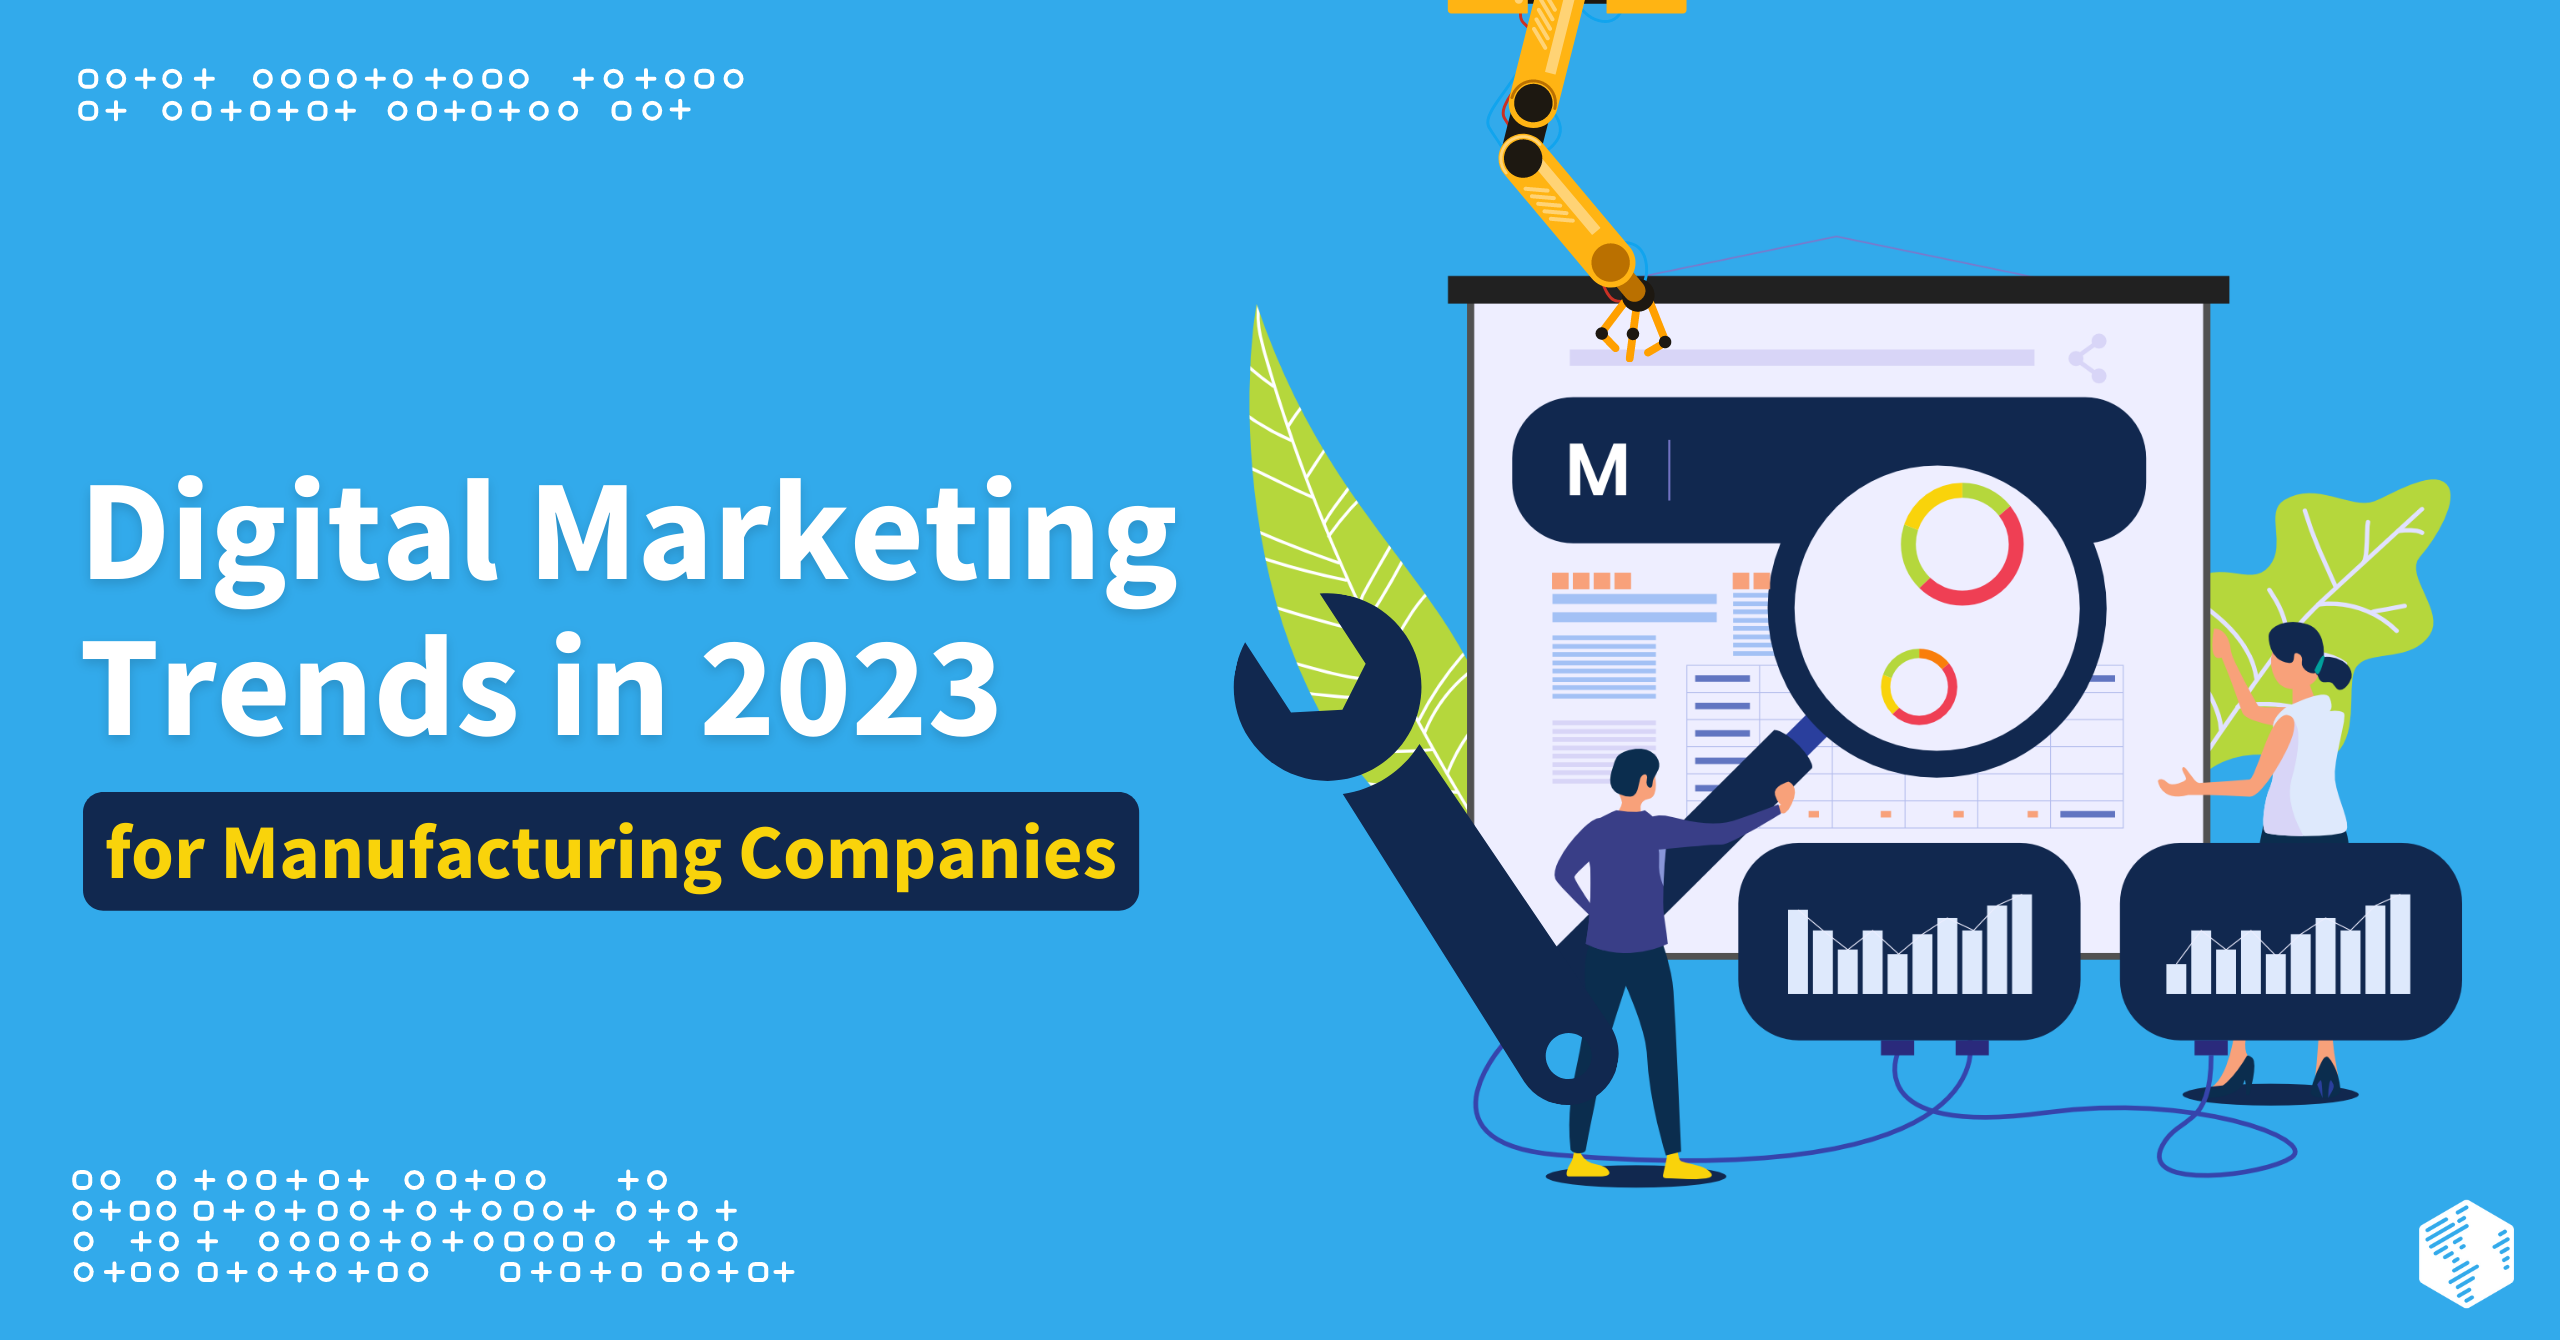 Digital Marketing Trends for Manufacturing Companies